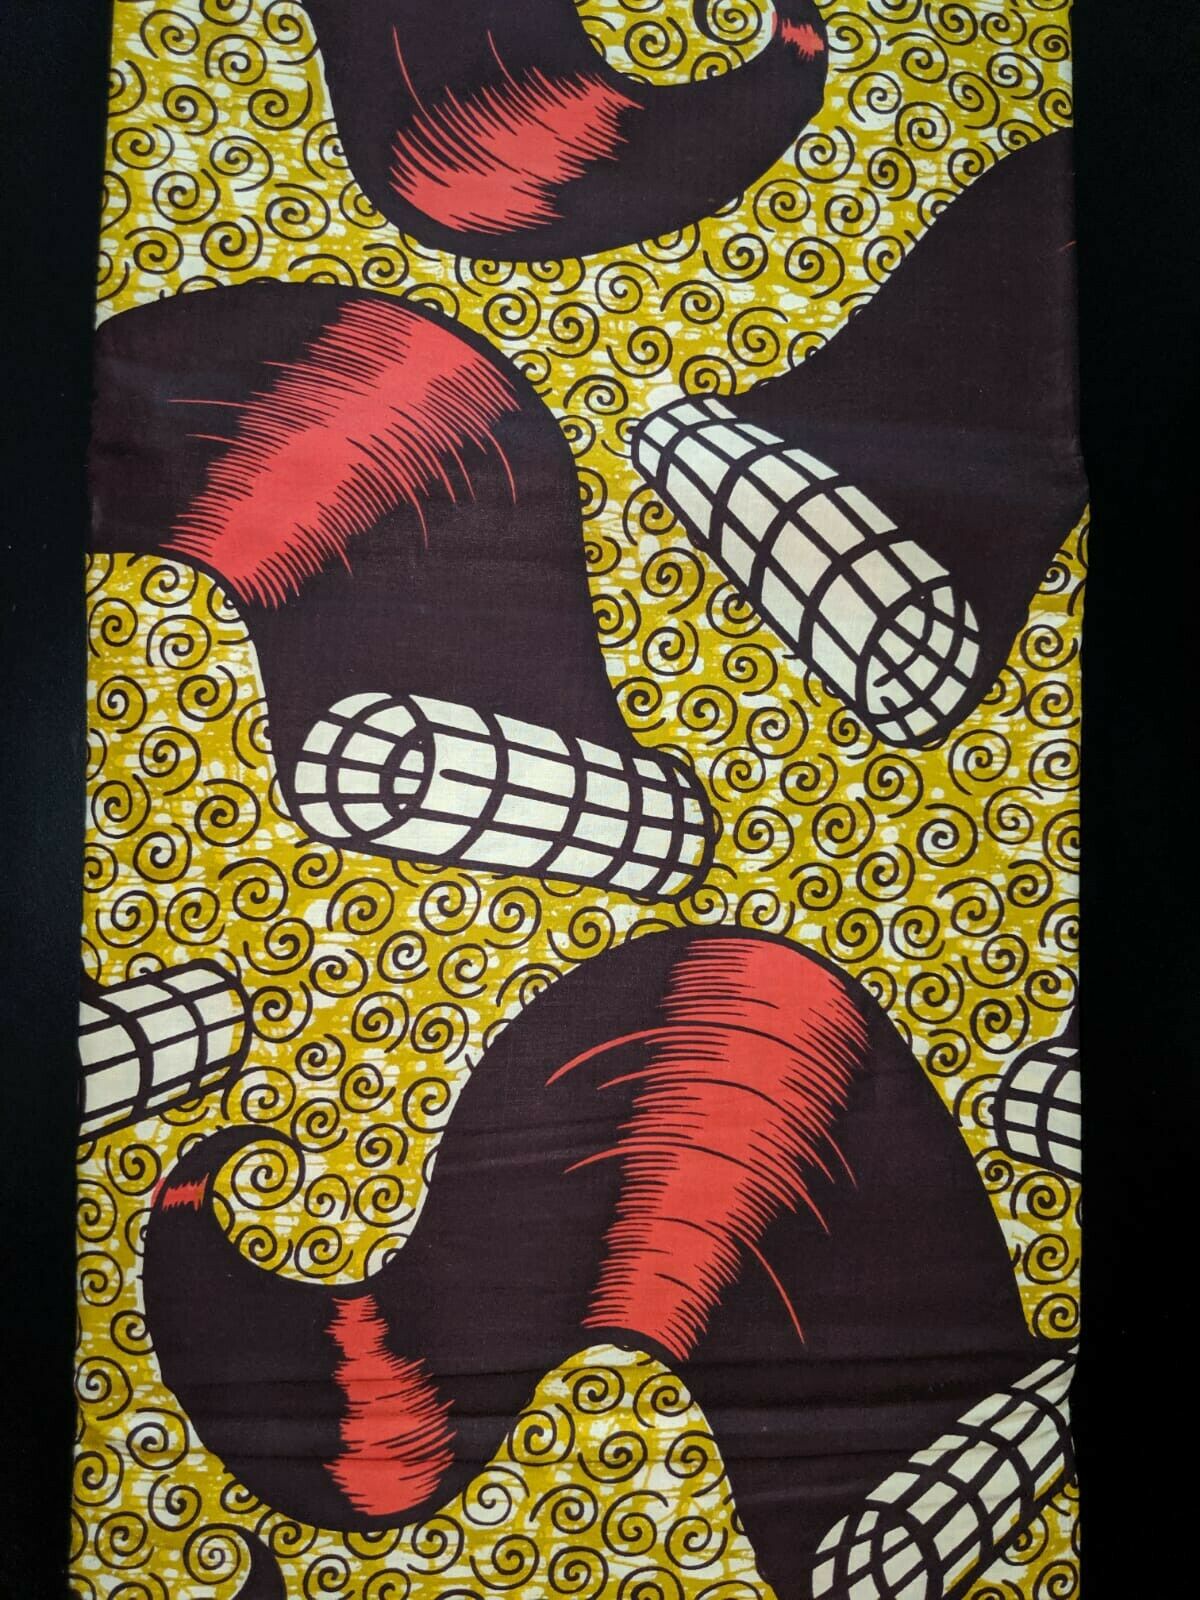 MULTICOLOR African Wax Print 100% Cotton Fabric (44 in.) 3yrds $16